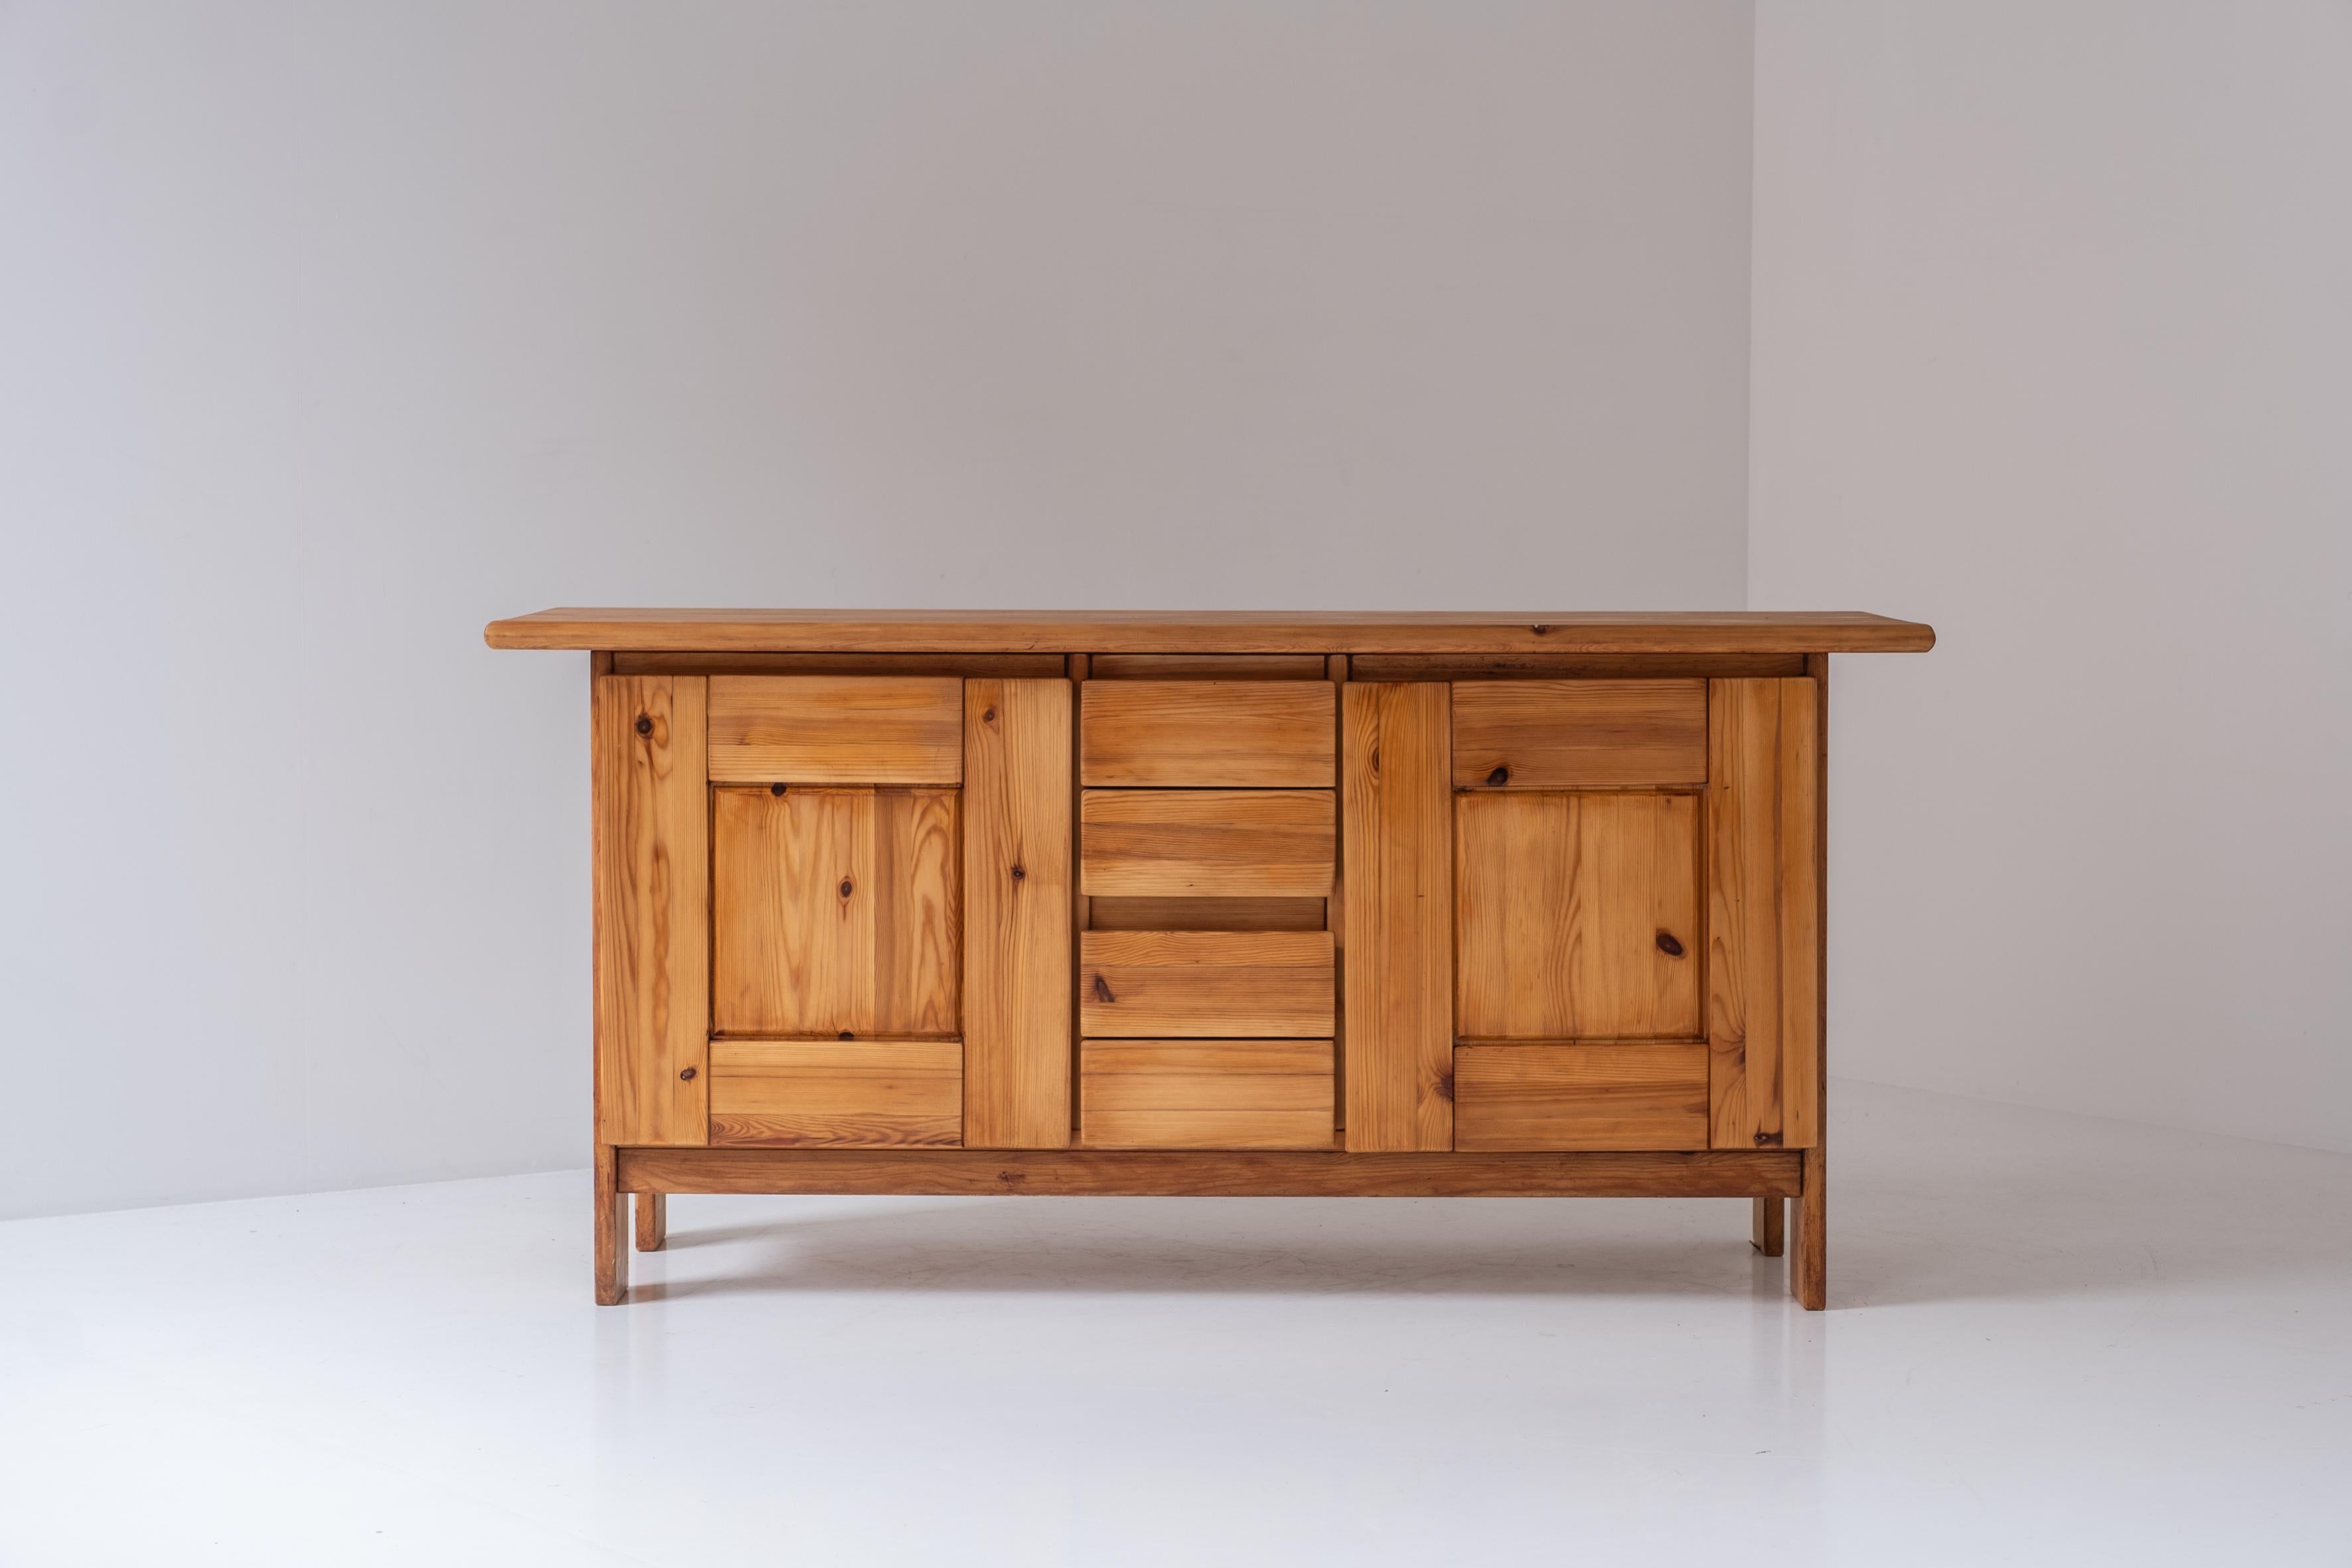 Great sideboard designed and manufactured in France, dating from the 1960s. This storage cabinet is made out of solid elm and features an open storage area on the left and right of the middle drawer section. This piece remains in a very good